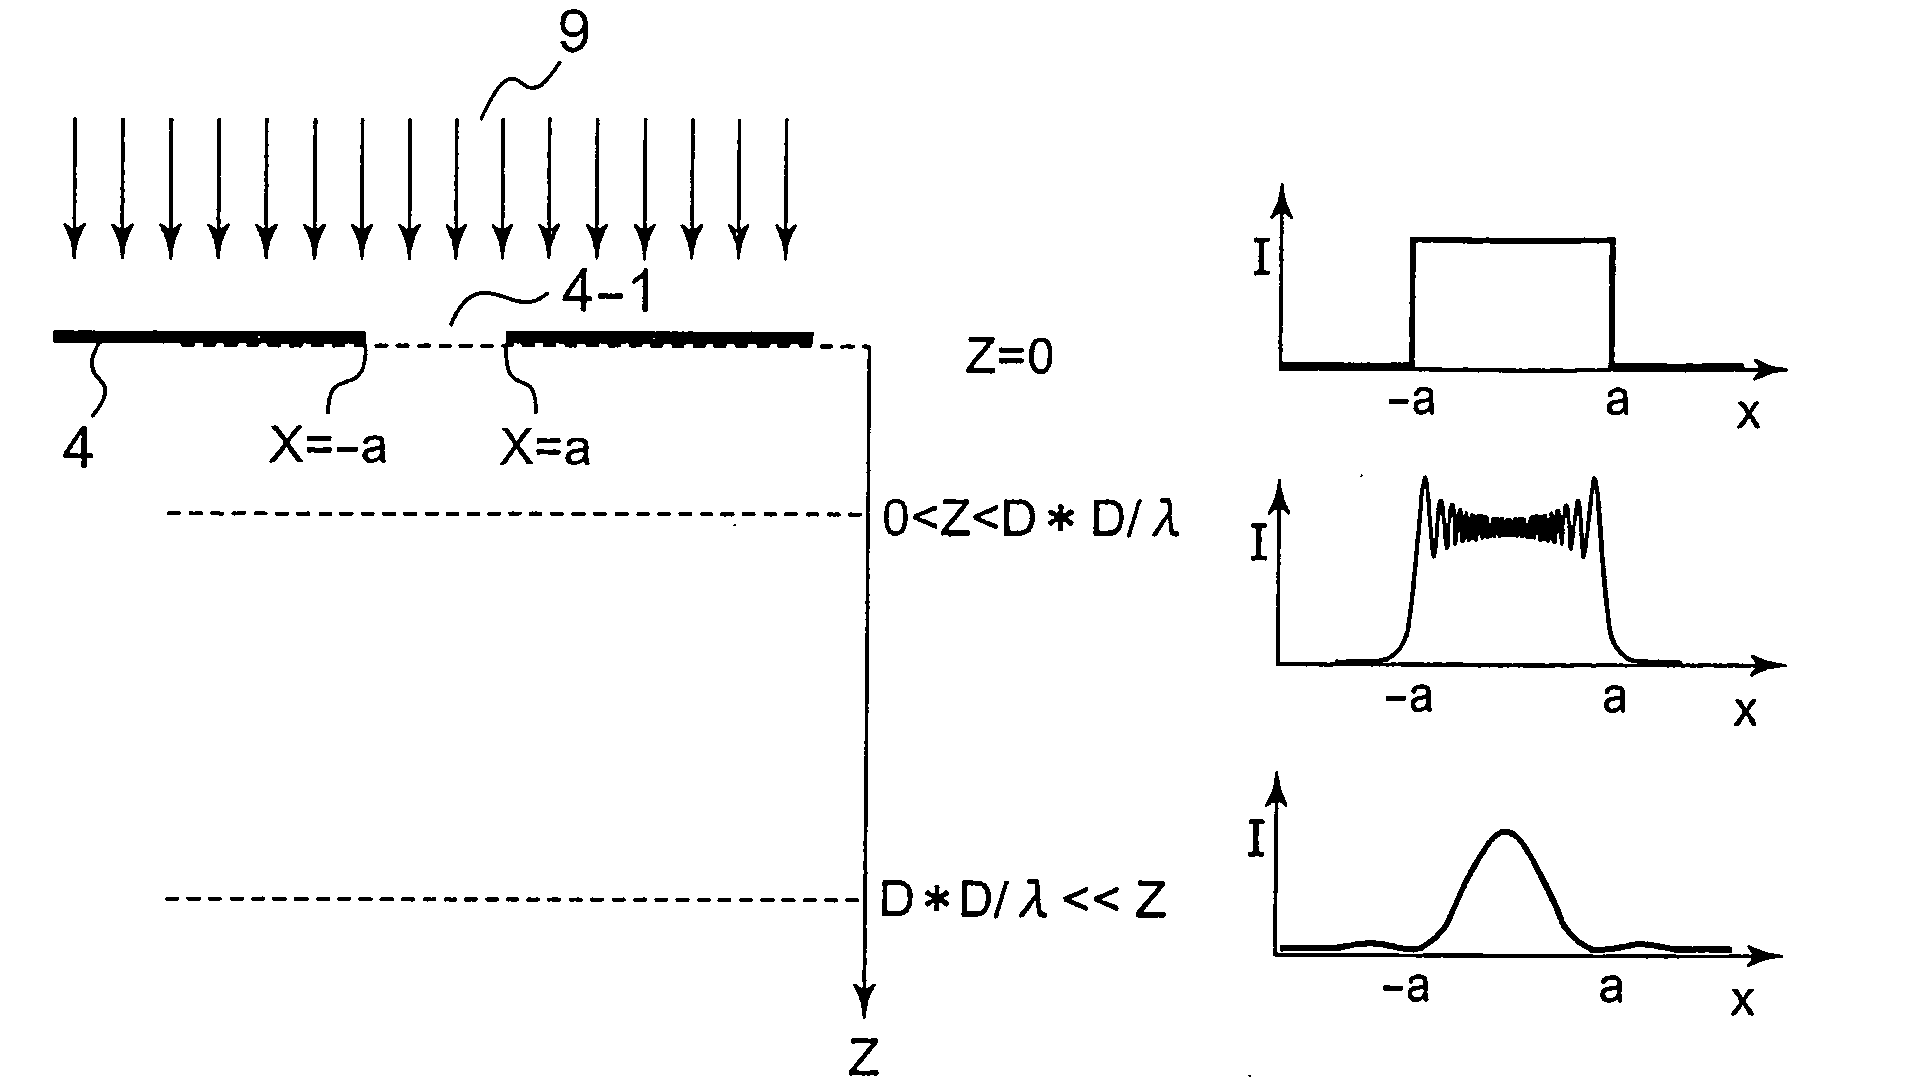 Exposure mask and method of forming pattern